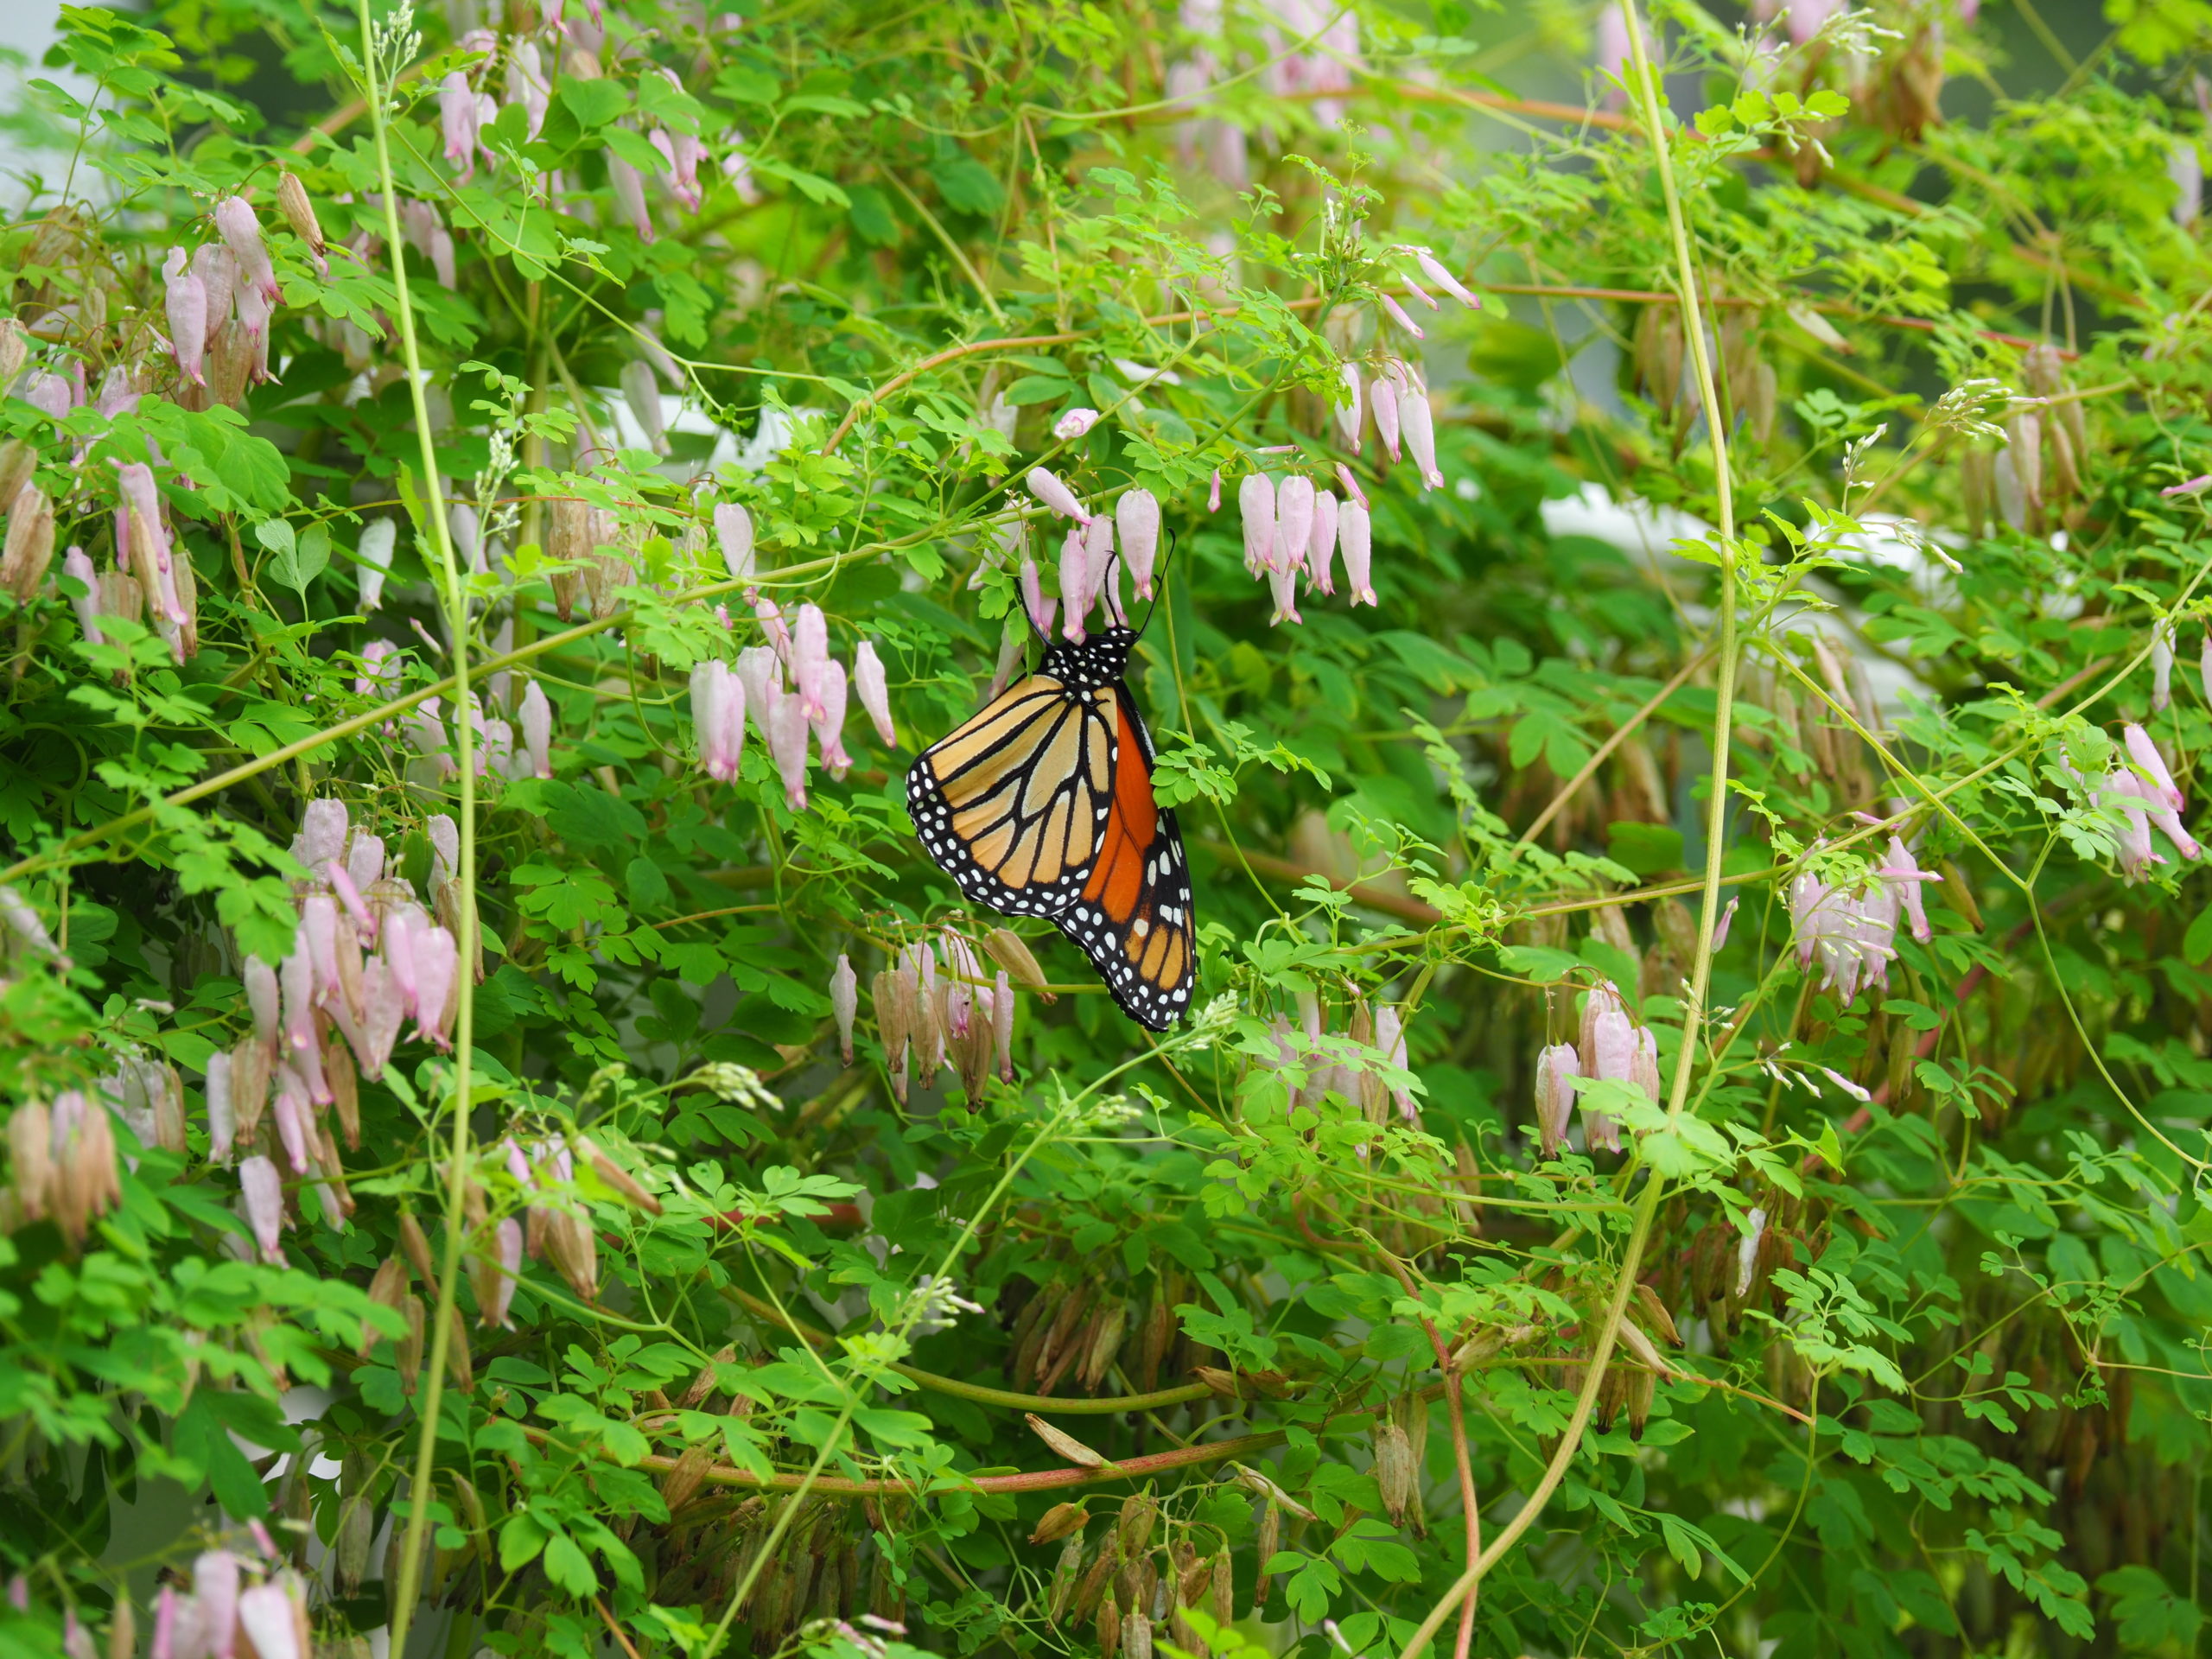 Late in the summer the monarch butterflies visited Adlumia regularly for snacking.